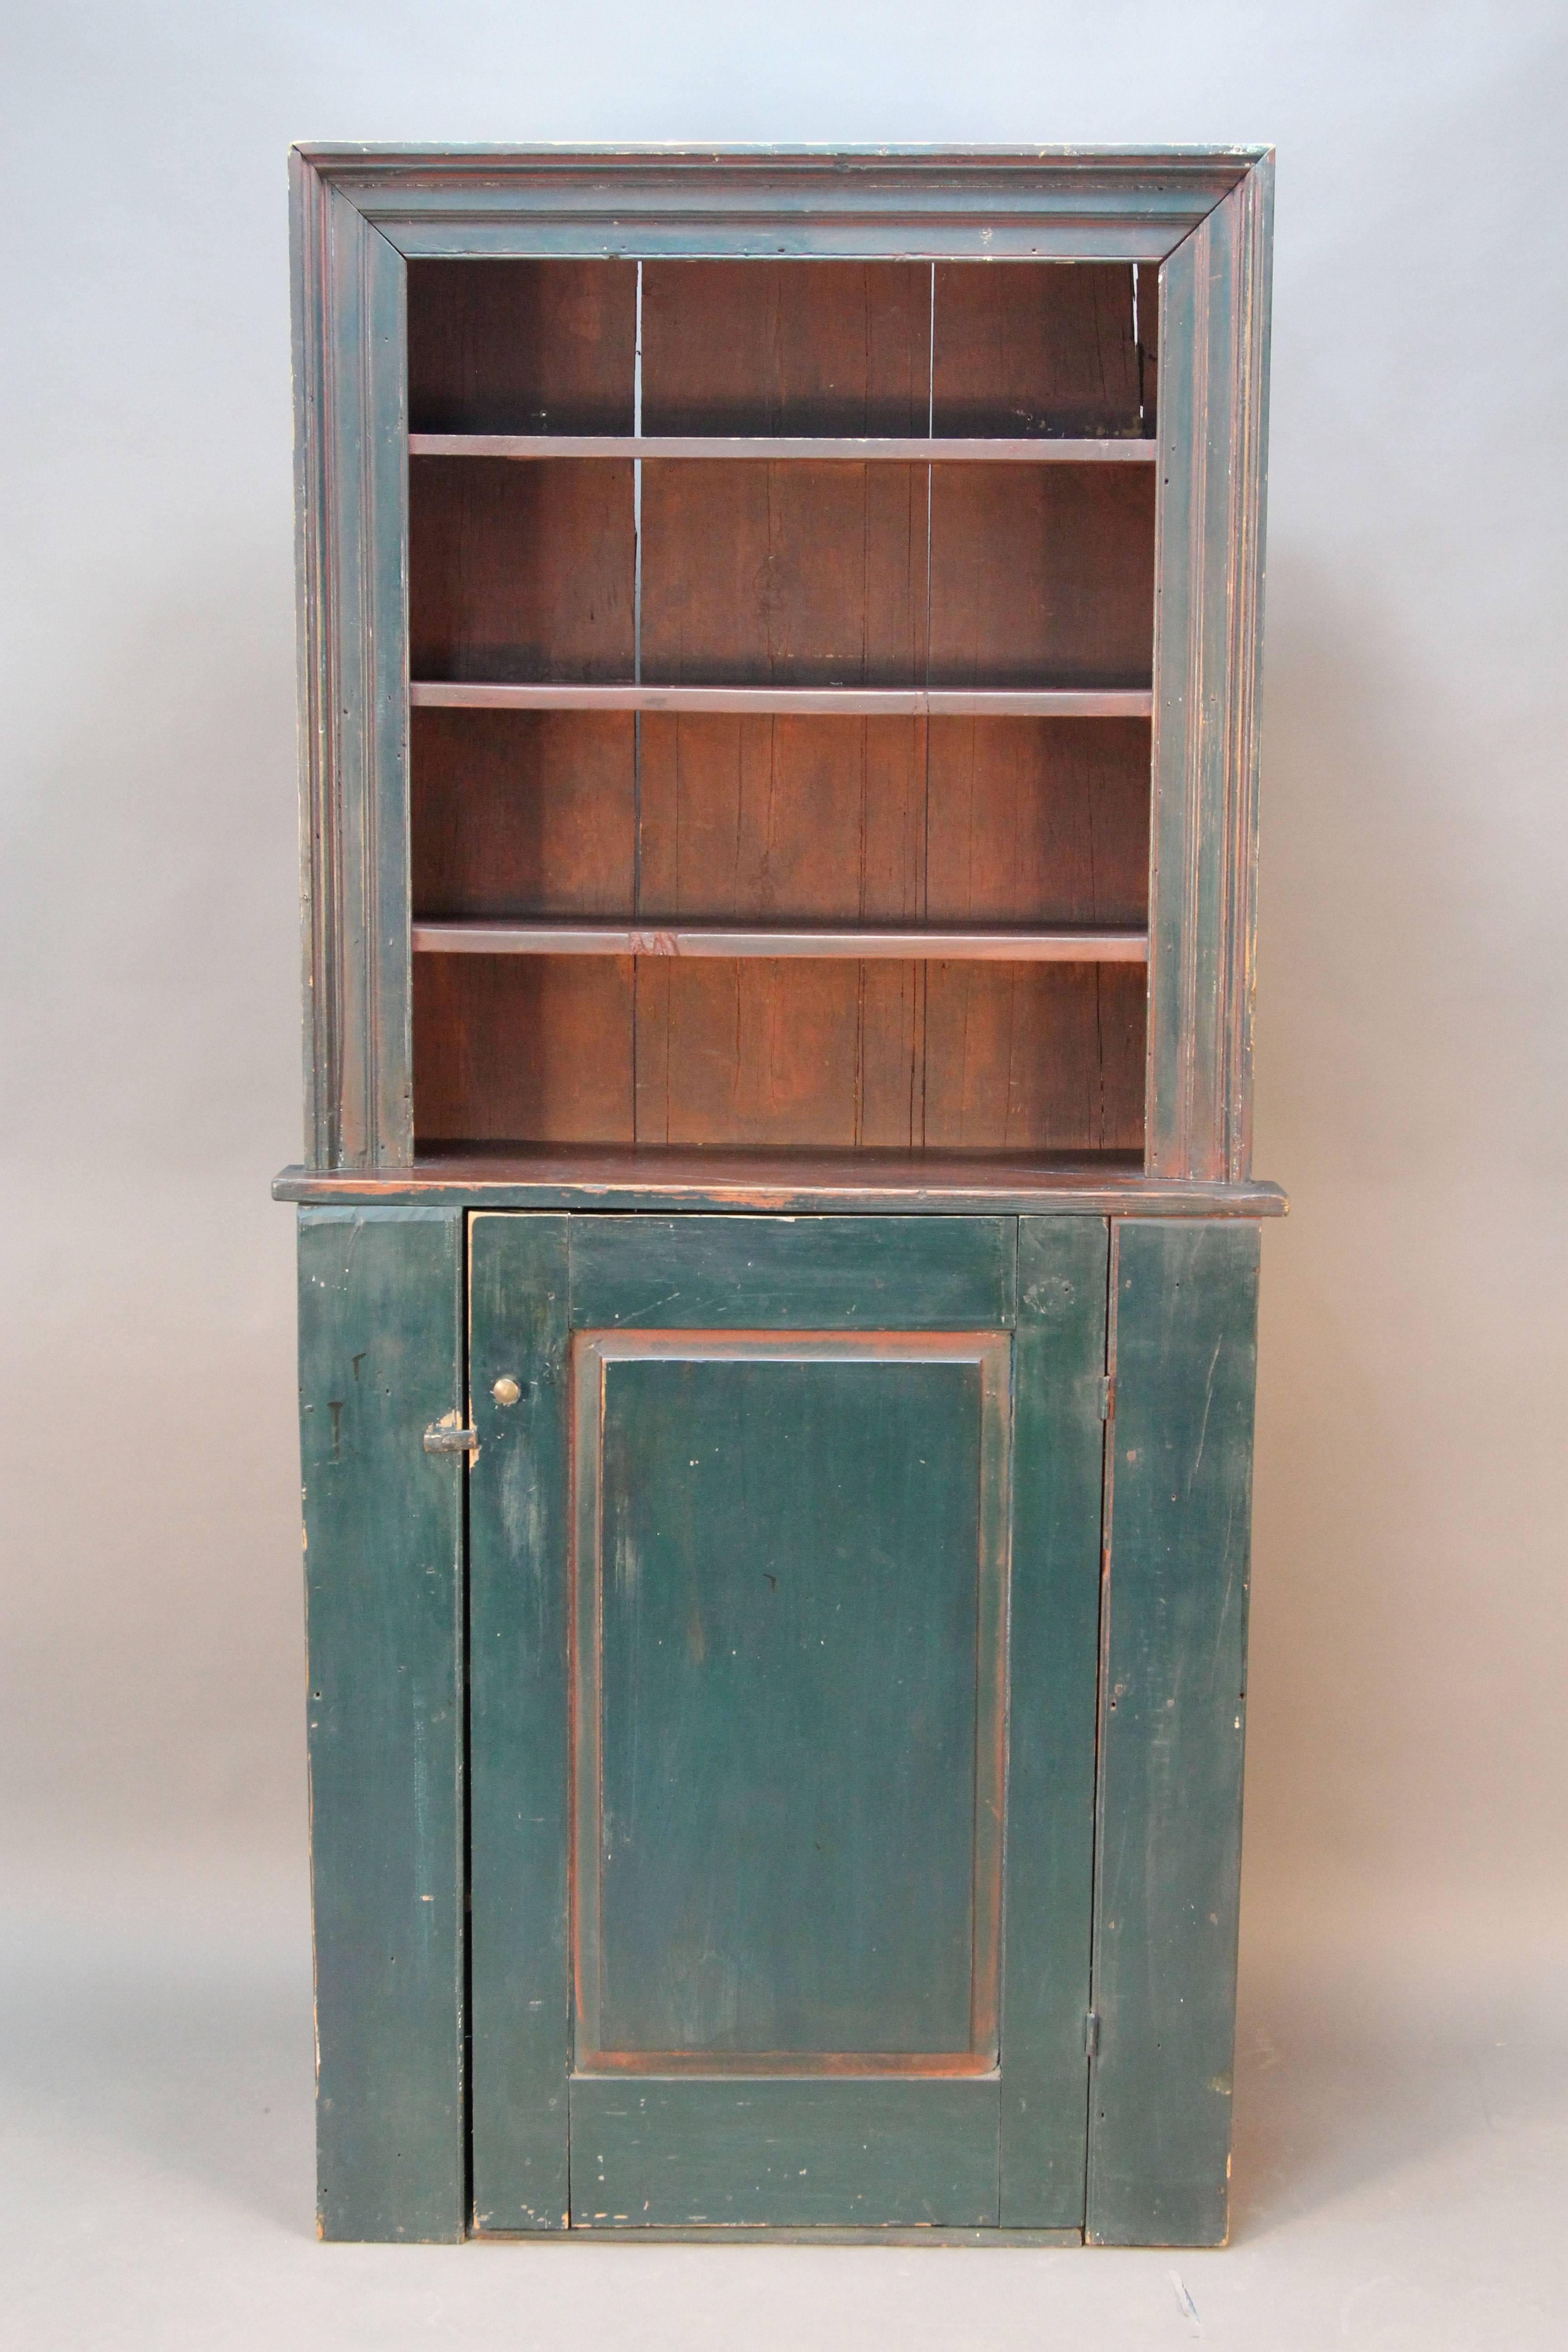 Primitive stepback cupboard with elegant trim. Original red milk paint, blue green painted addend in late 1800s. Solid wood construction with square nails and wood pegs. Made of pine.